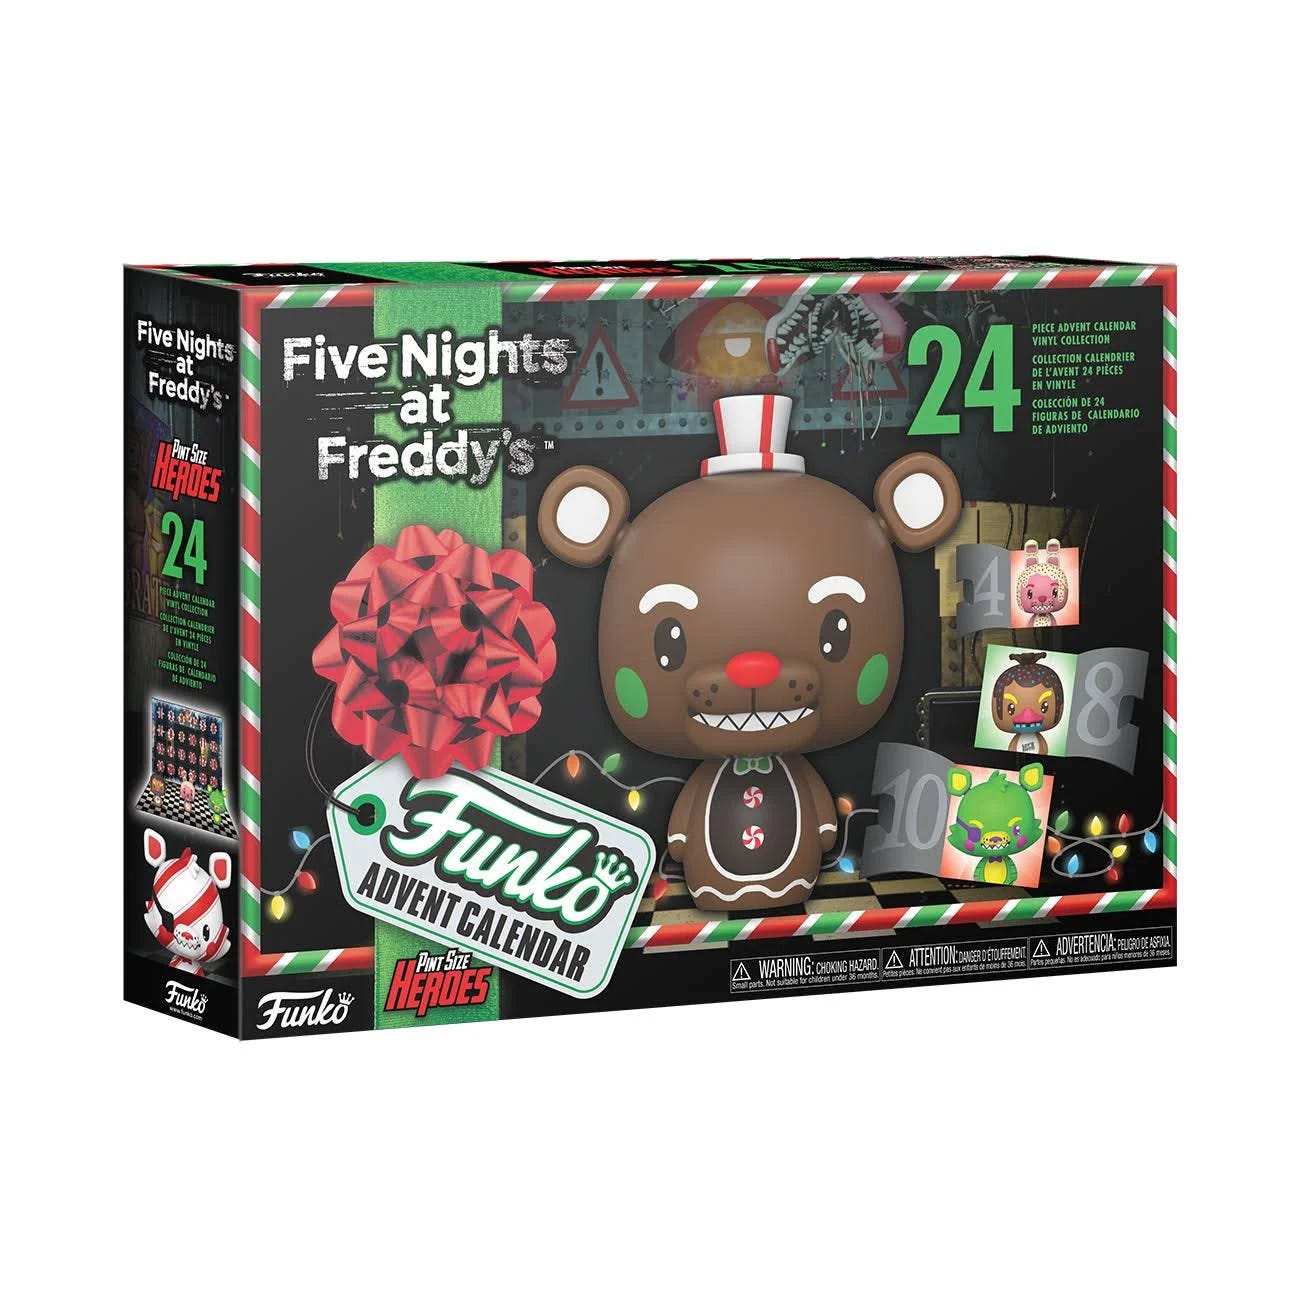 Five Nights at Freddy's Funko Advent Calendar: Dimensions and Colorful Collectibles | Image